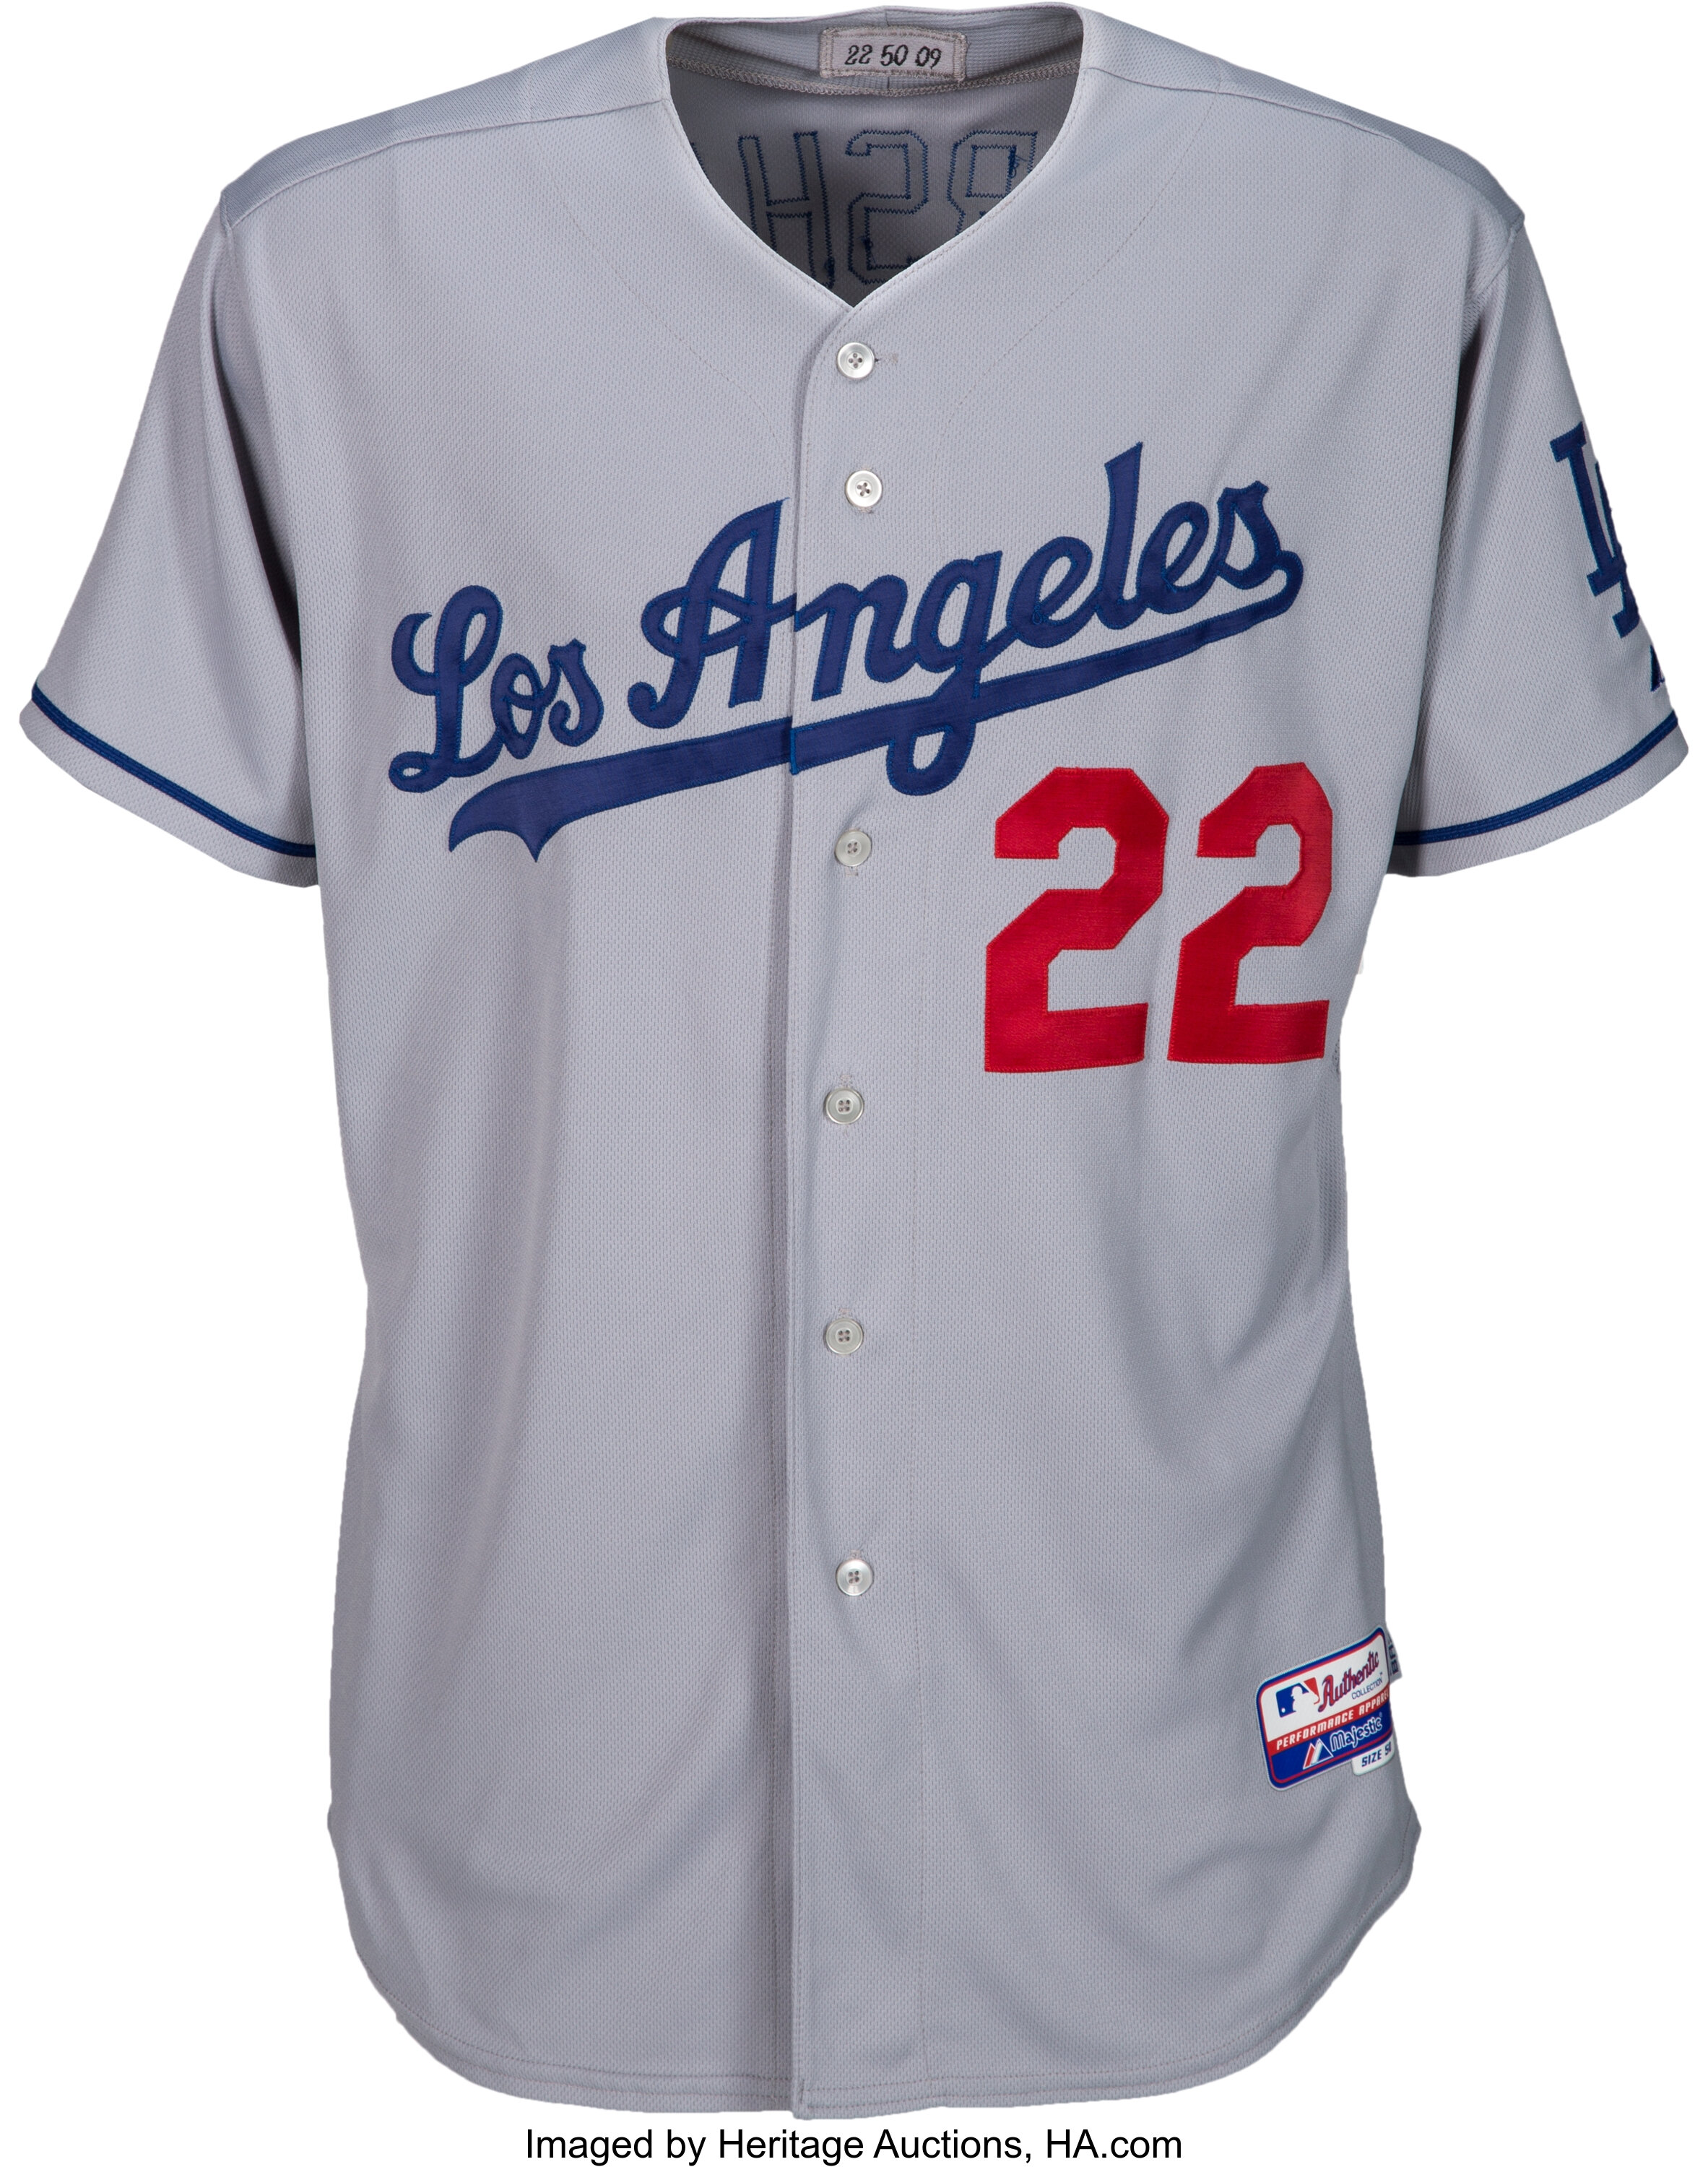 Clayton Kershaw Los Angeles Dodgers Autographed Majestic White